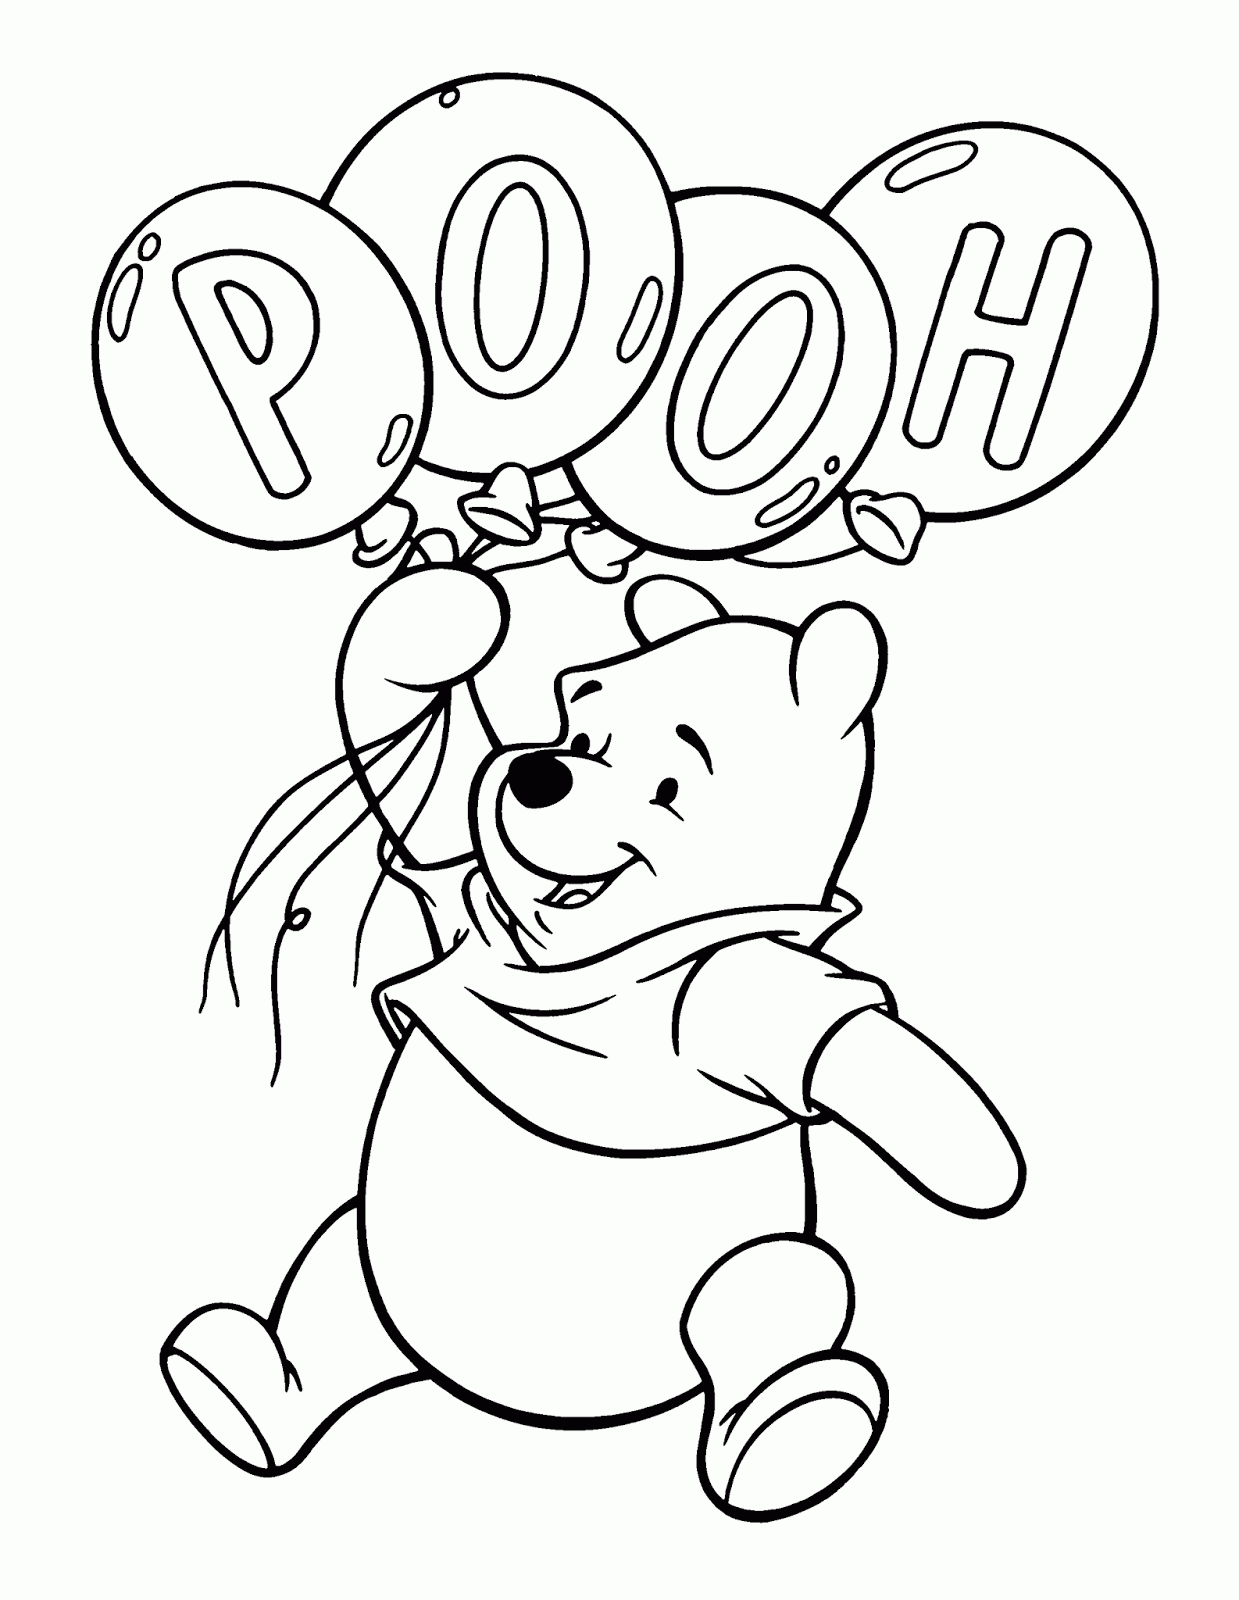  Coloring  Pages  Winnie  the Pooh  Kids Online World Blog